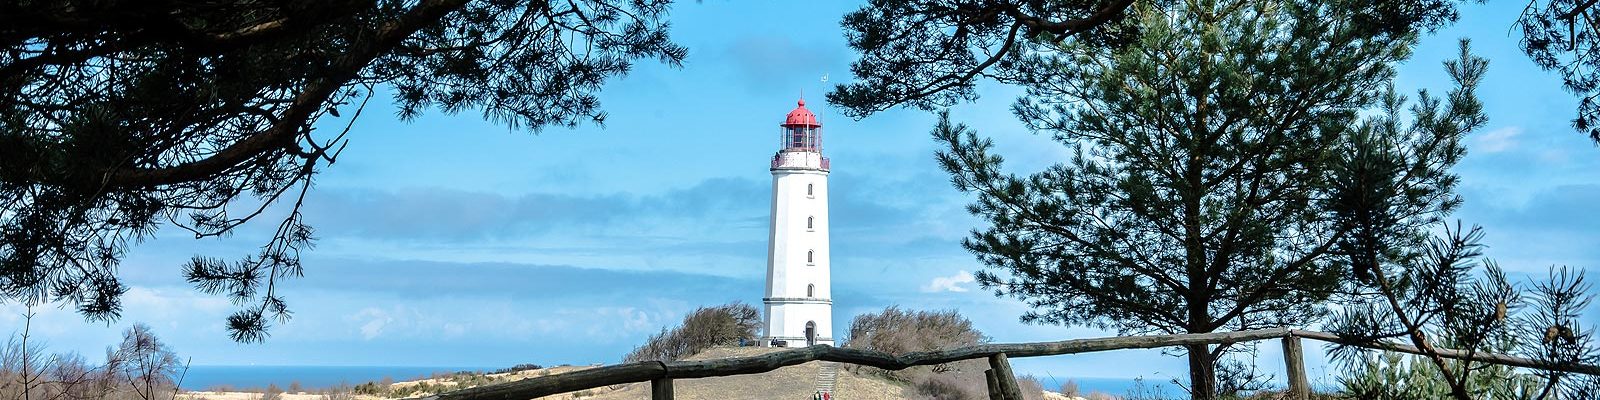 Lighthouse at the thorn bush Hiddensee